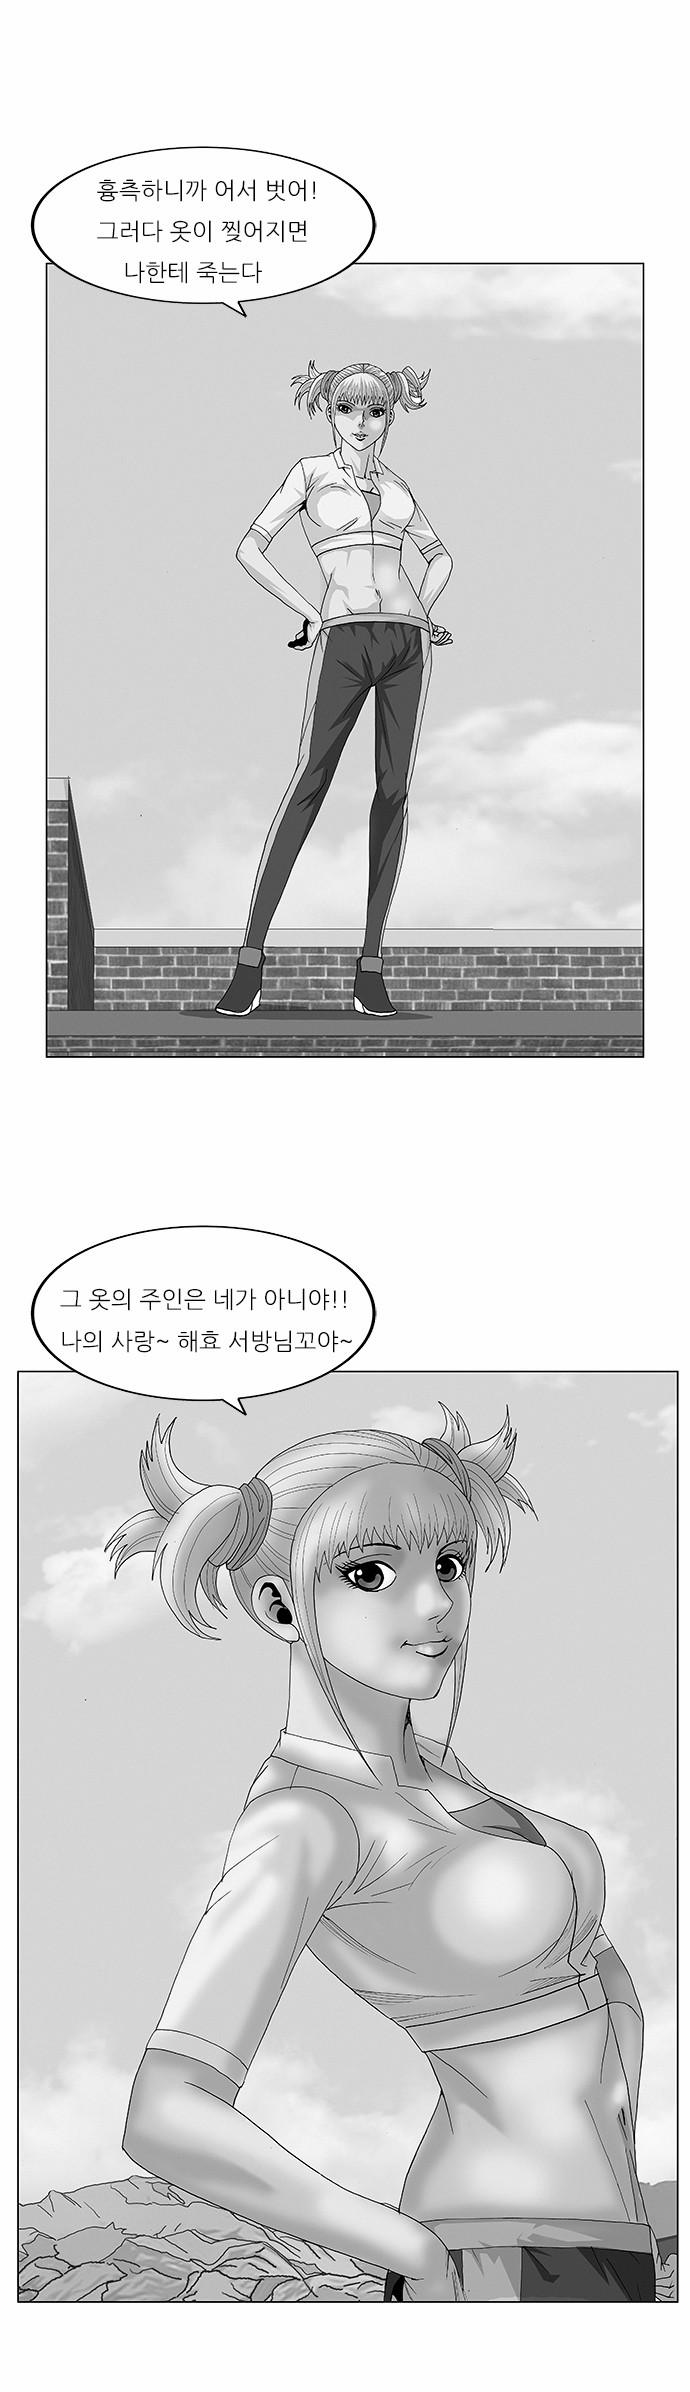 Ultimate Legend - Kang Hae Hyo - Chapter 69 - Page 1